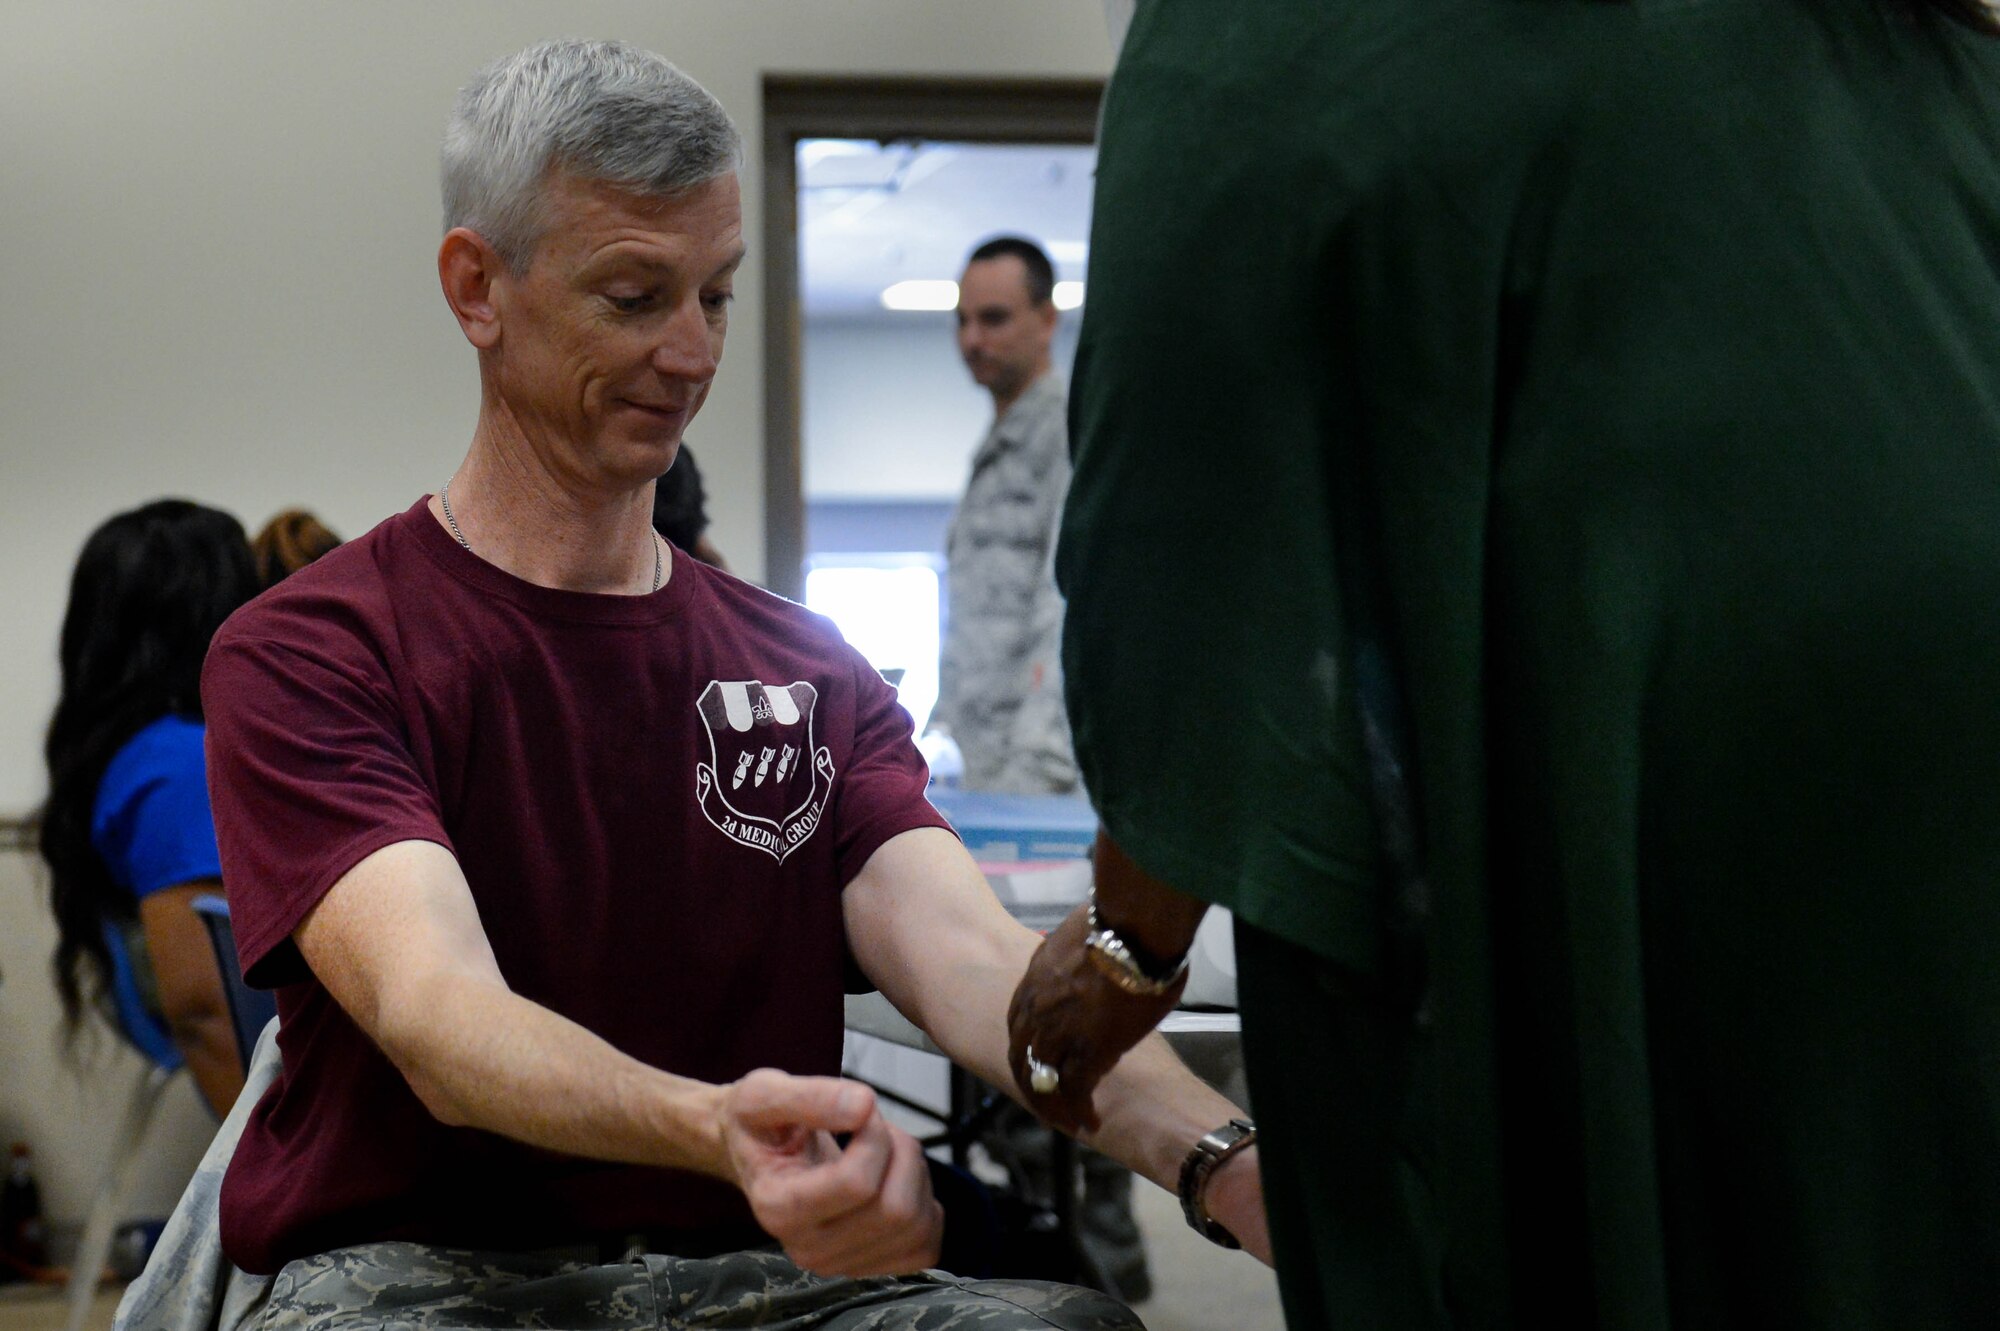 Col. Robert Kent, 2nd Medical Group commander, prepares to give blood at the 2017 LifeShare Blood Drive at Barksdale Air Force Base, La., June 16, 2017. Only 38 percent of the United States population is able to donate blood, and only 10 percent of the population does so. (U.S. Air Force Photo/Airman 1st Class Sydney Bennett)